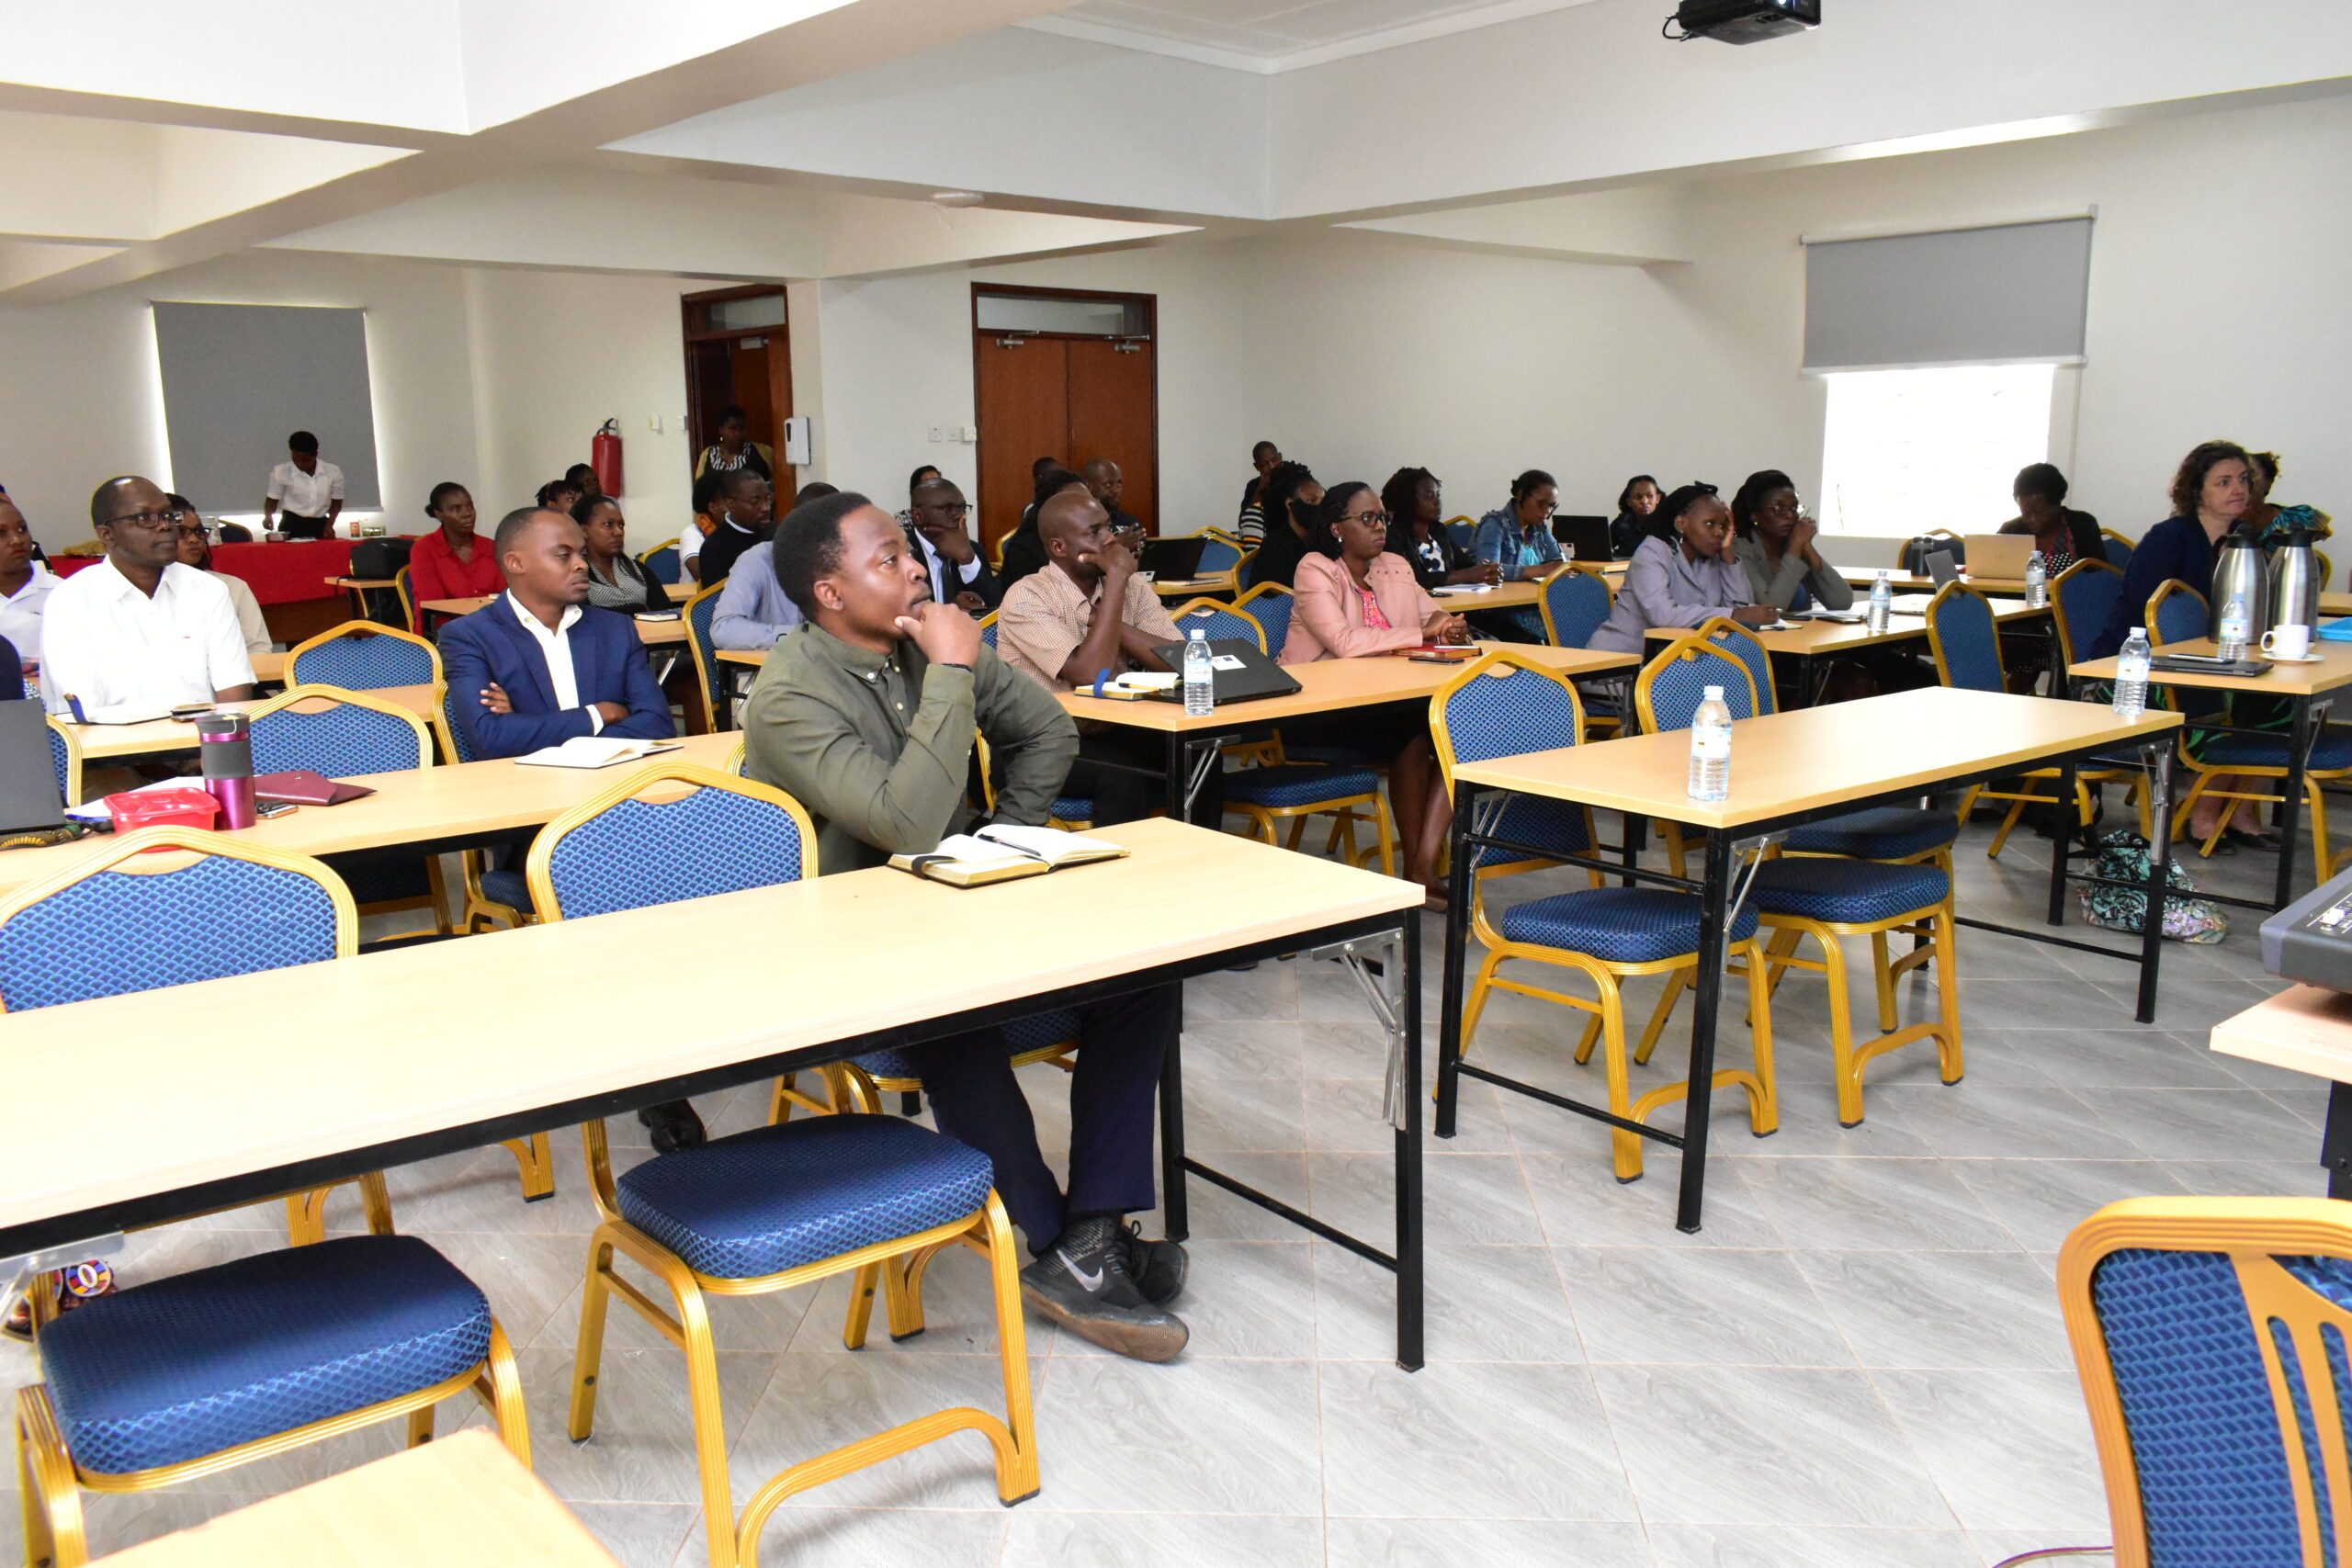 Participants from MU-JHU, Makerere University and other peer institutions attend the hybrid event on funding opportunities under UKRI-MRC